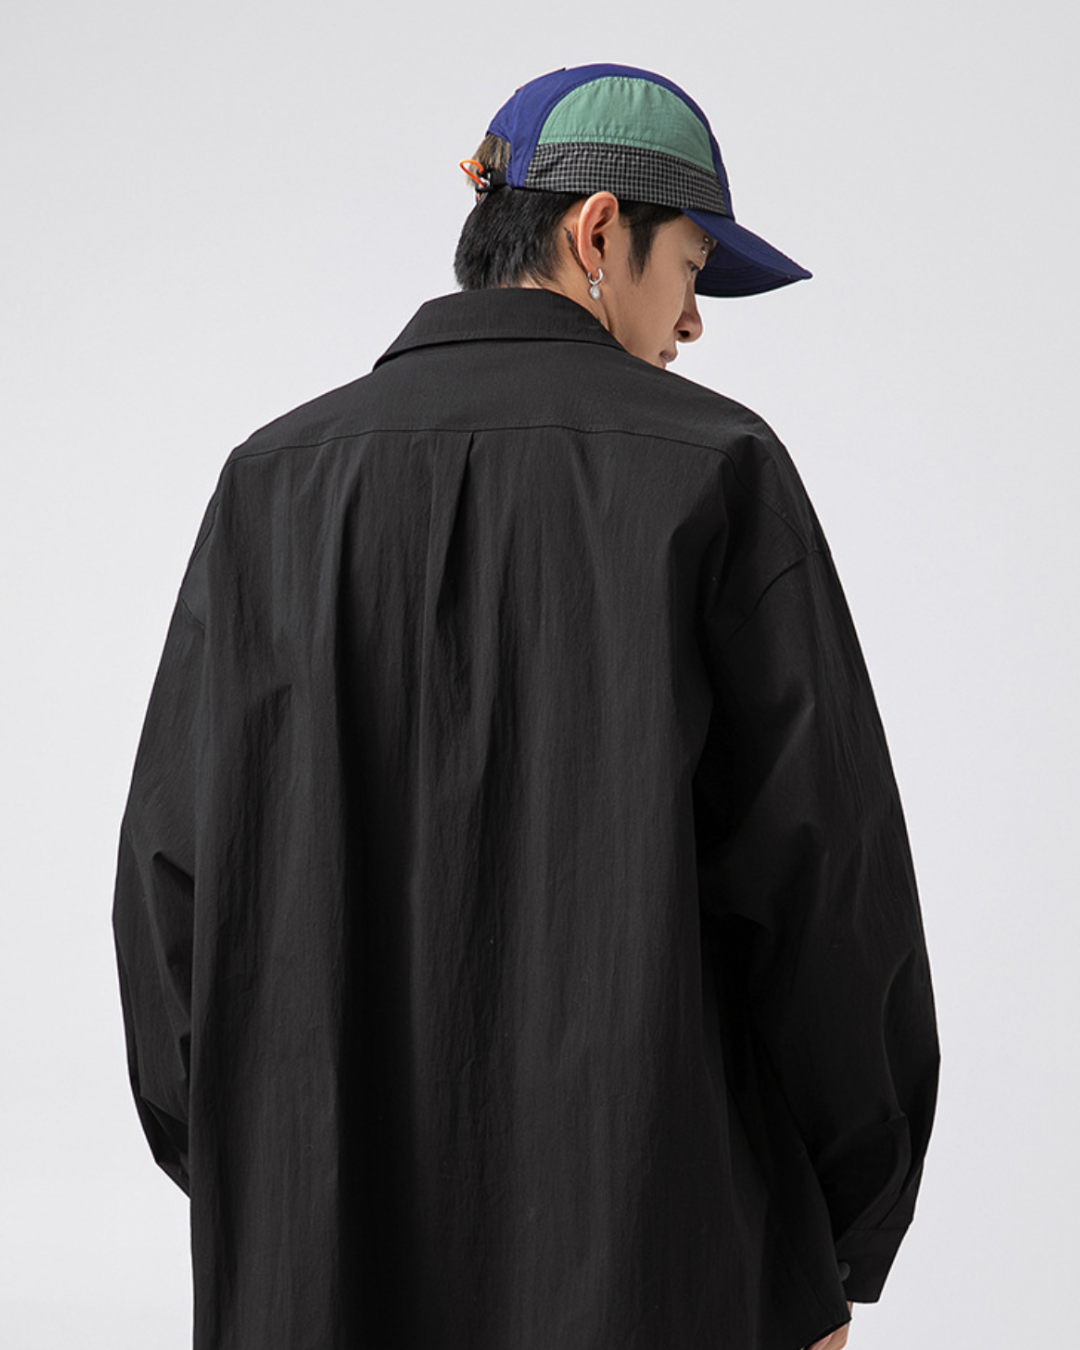 Latesnacked Overshirt in Black – The Daily Lab